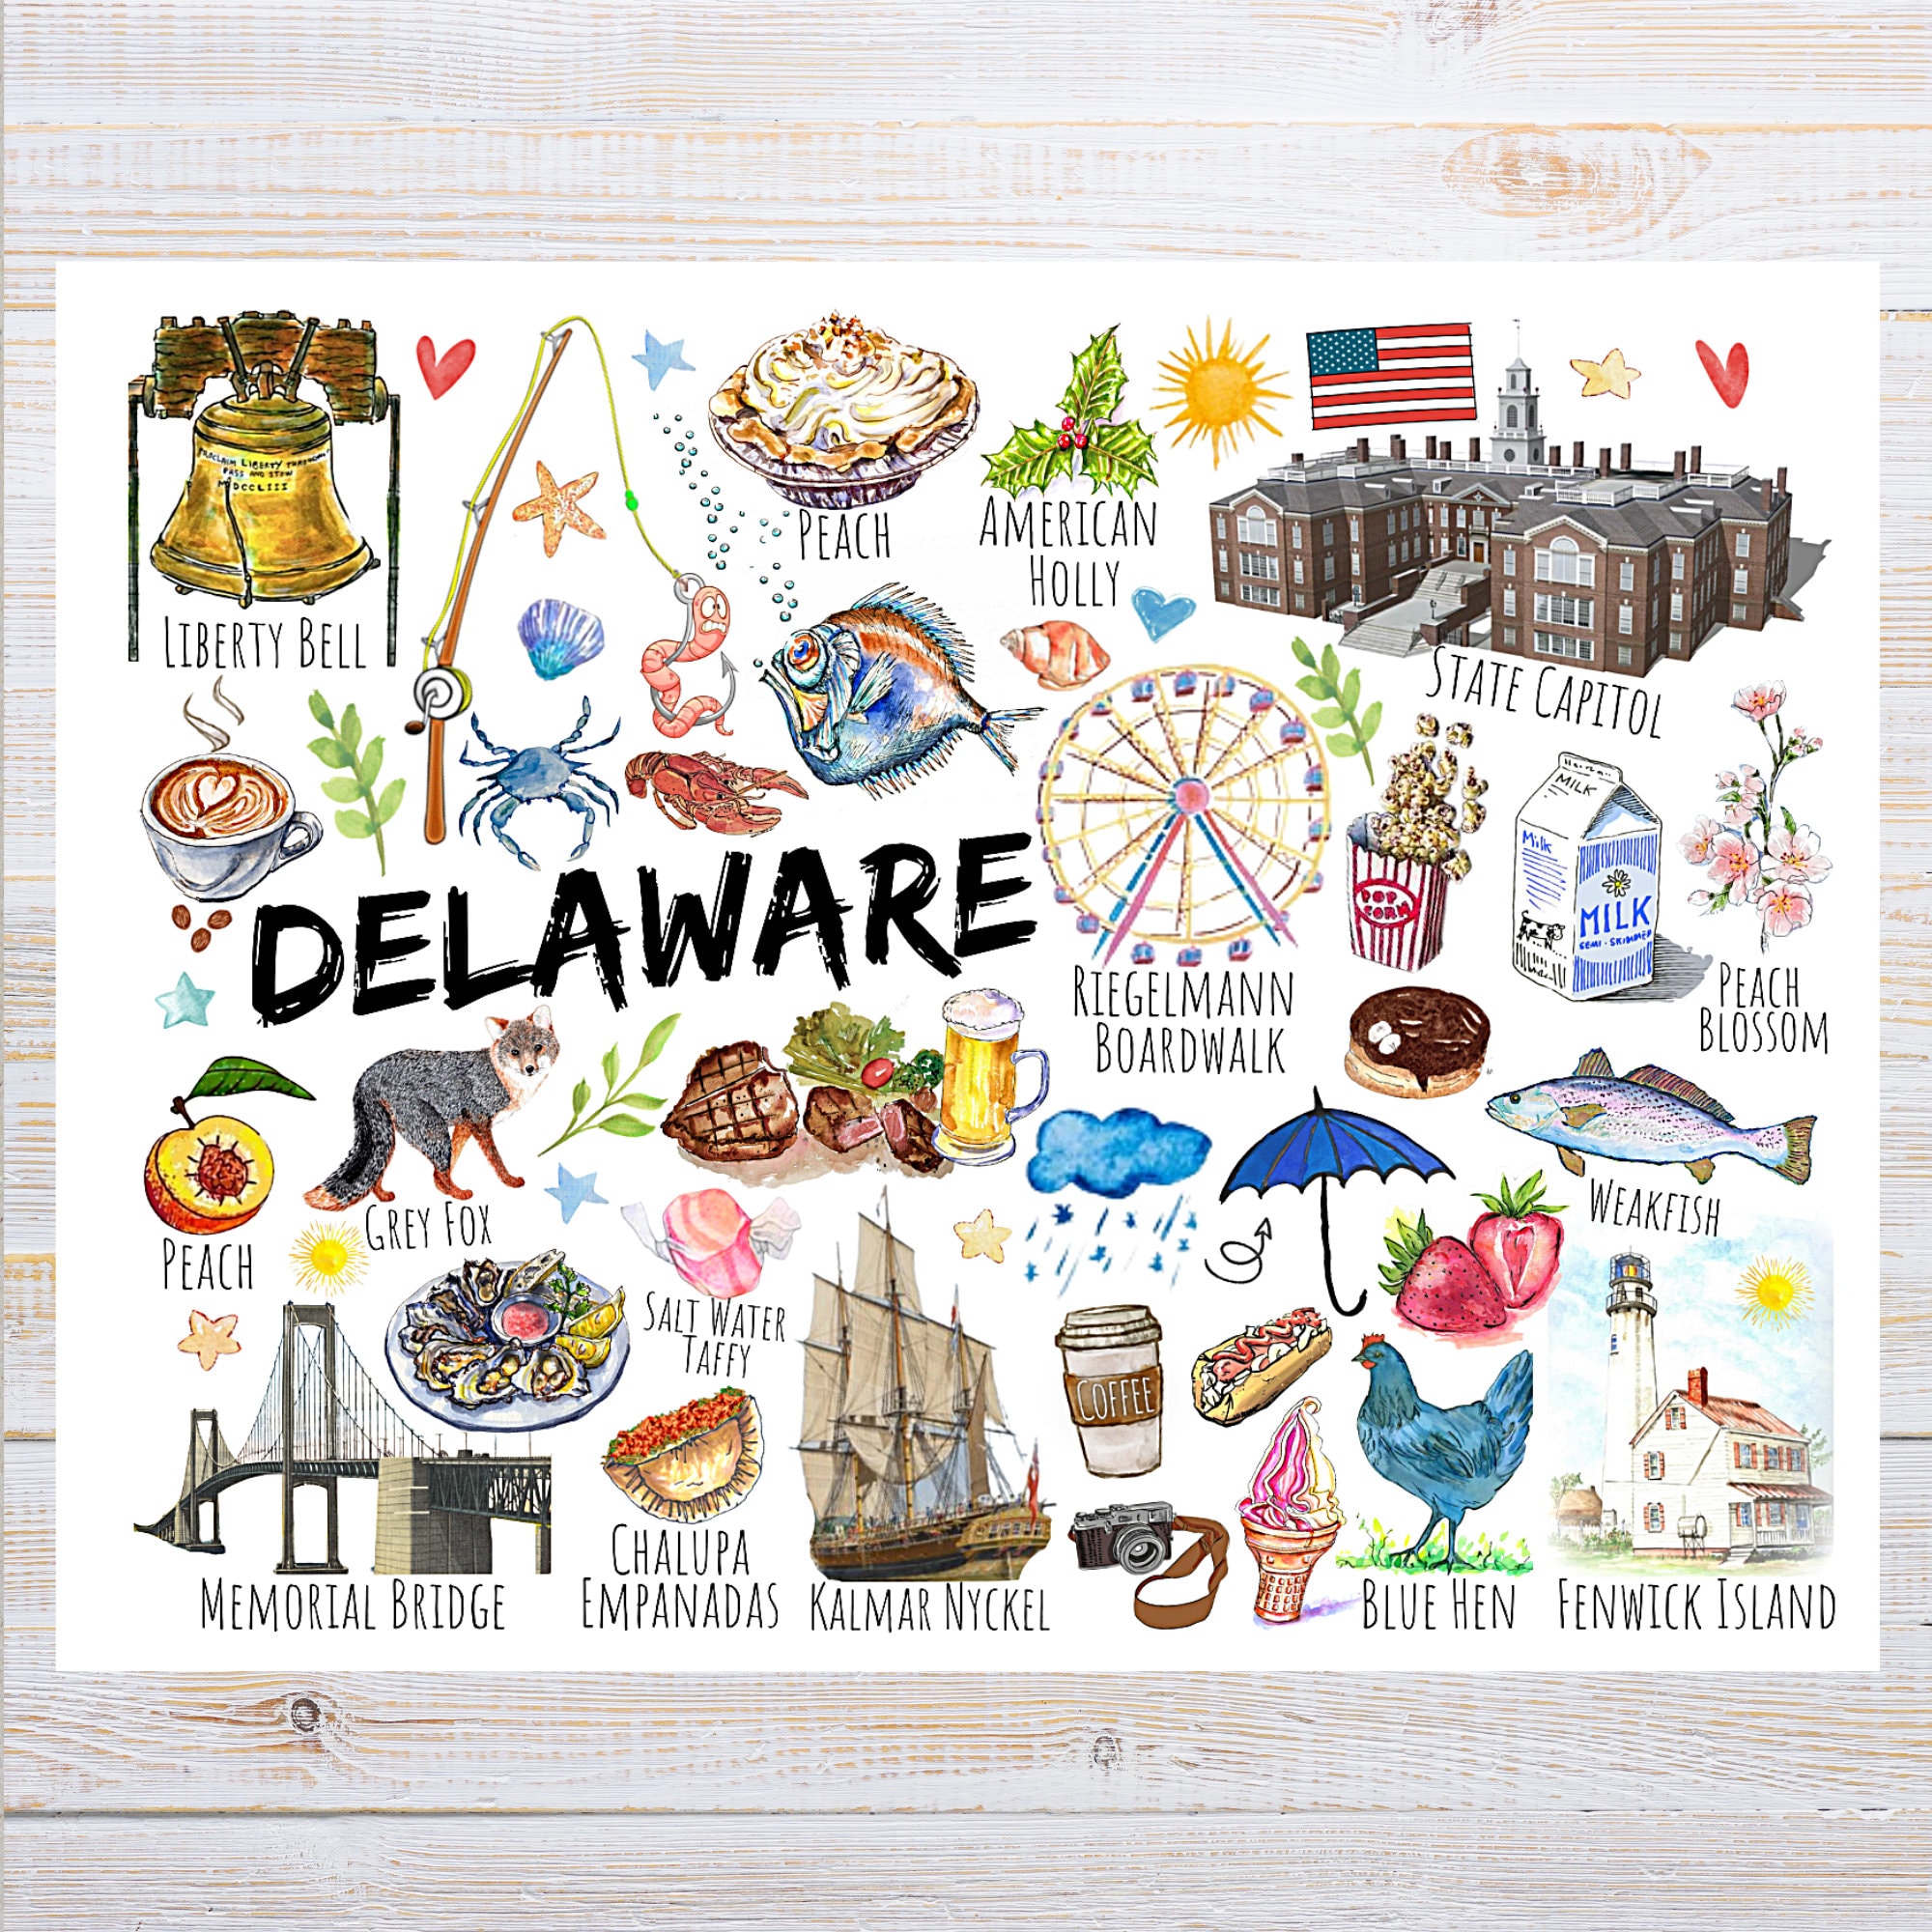 Delaware Themes and Landmarks Postcard 1 Postcard Thick